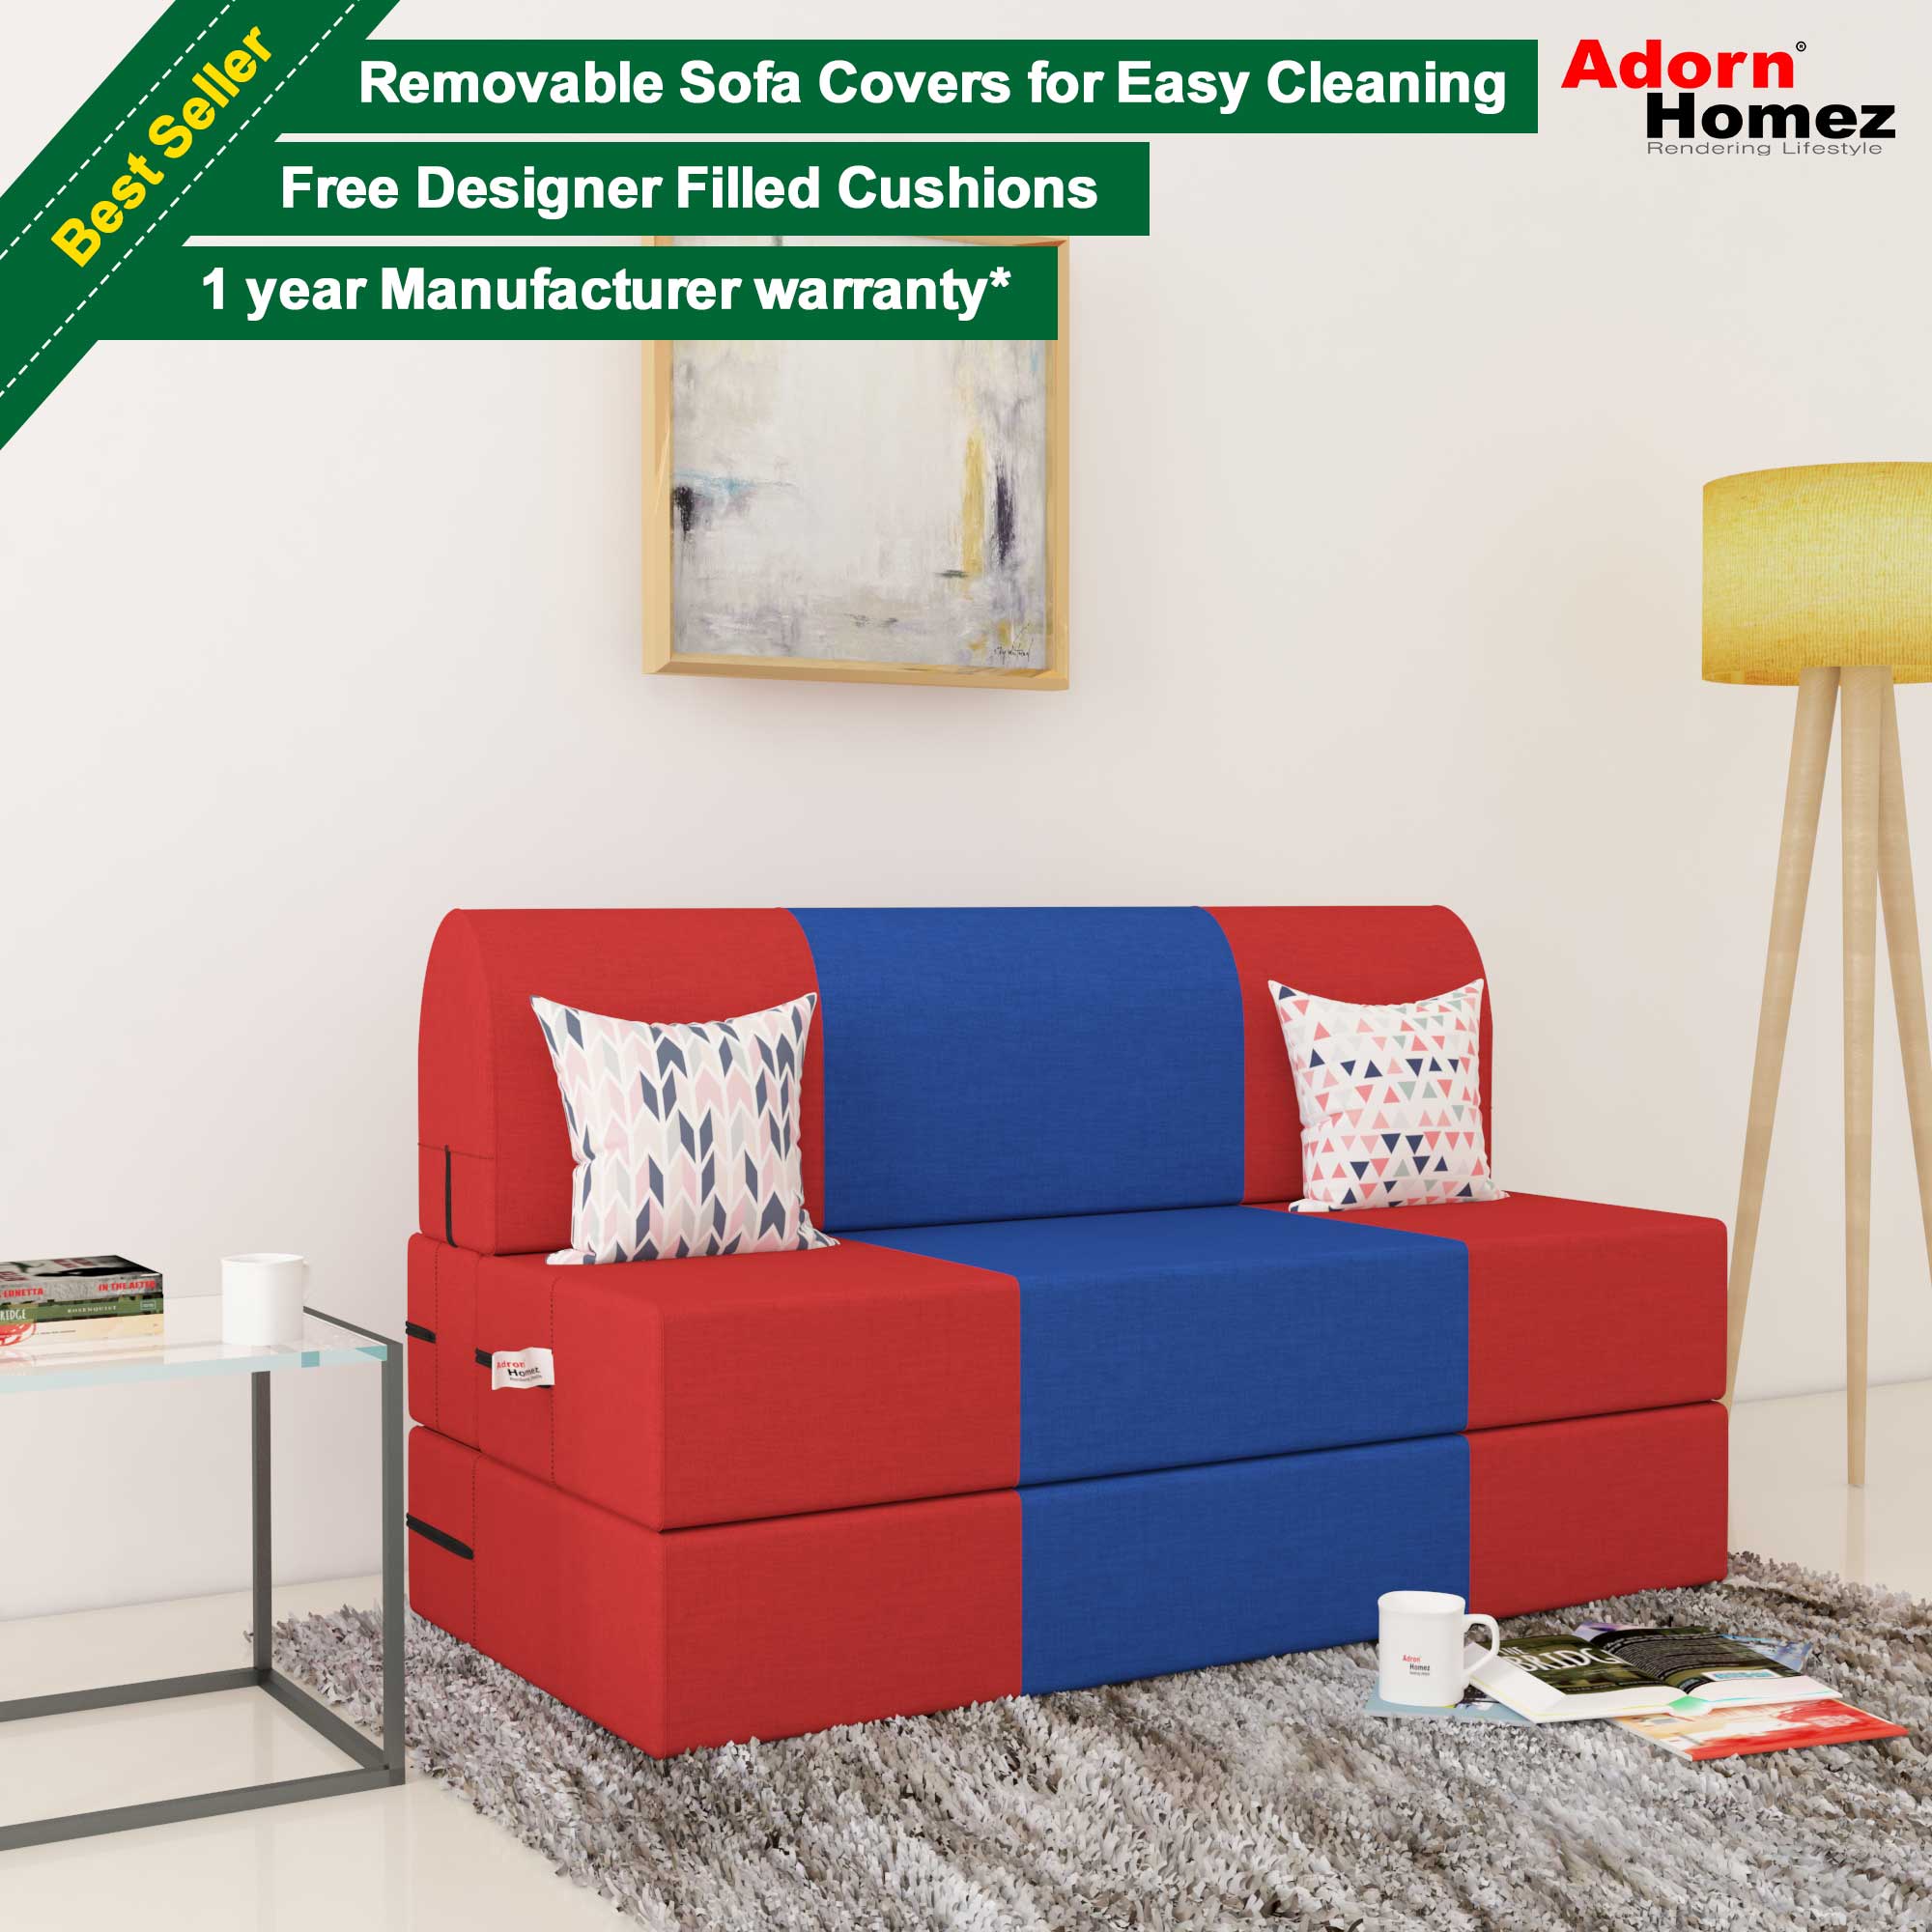 4ft Free Sofa X 2 Seater Bed adornhomez Designer - With – 6ft Homez Adorn Zeal Fill